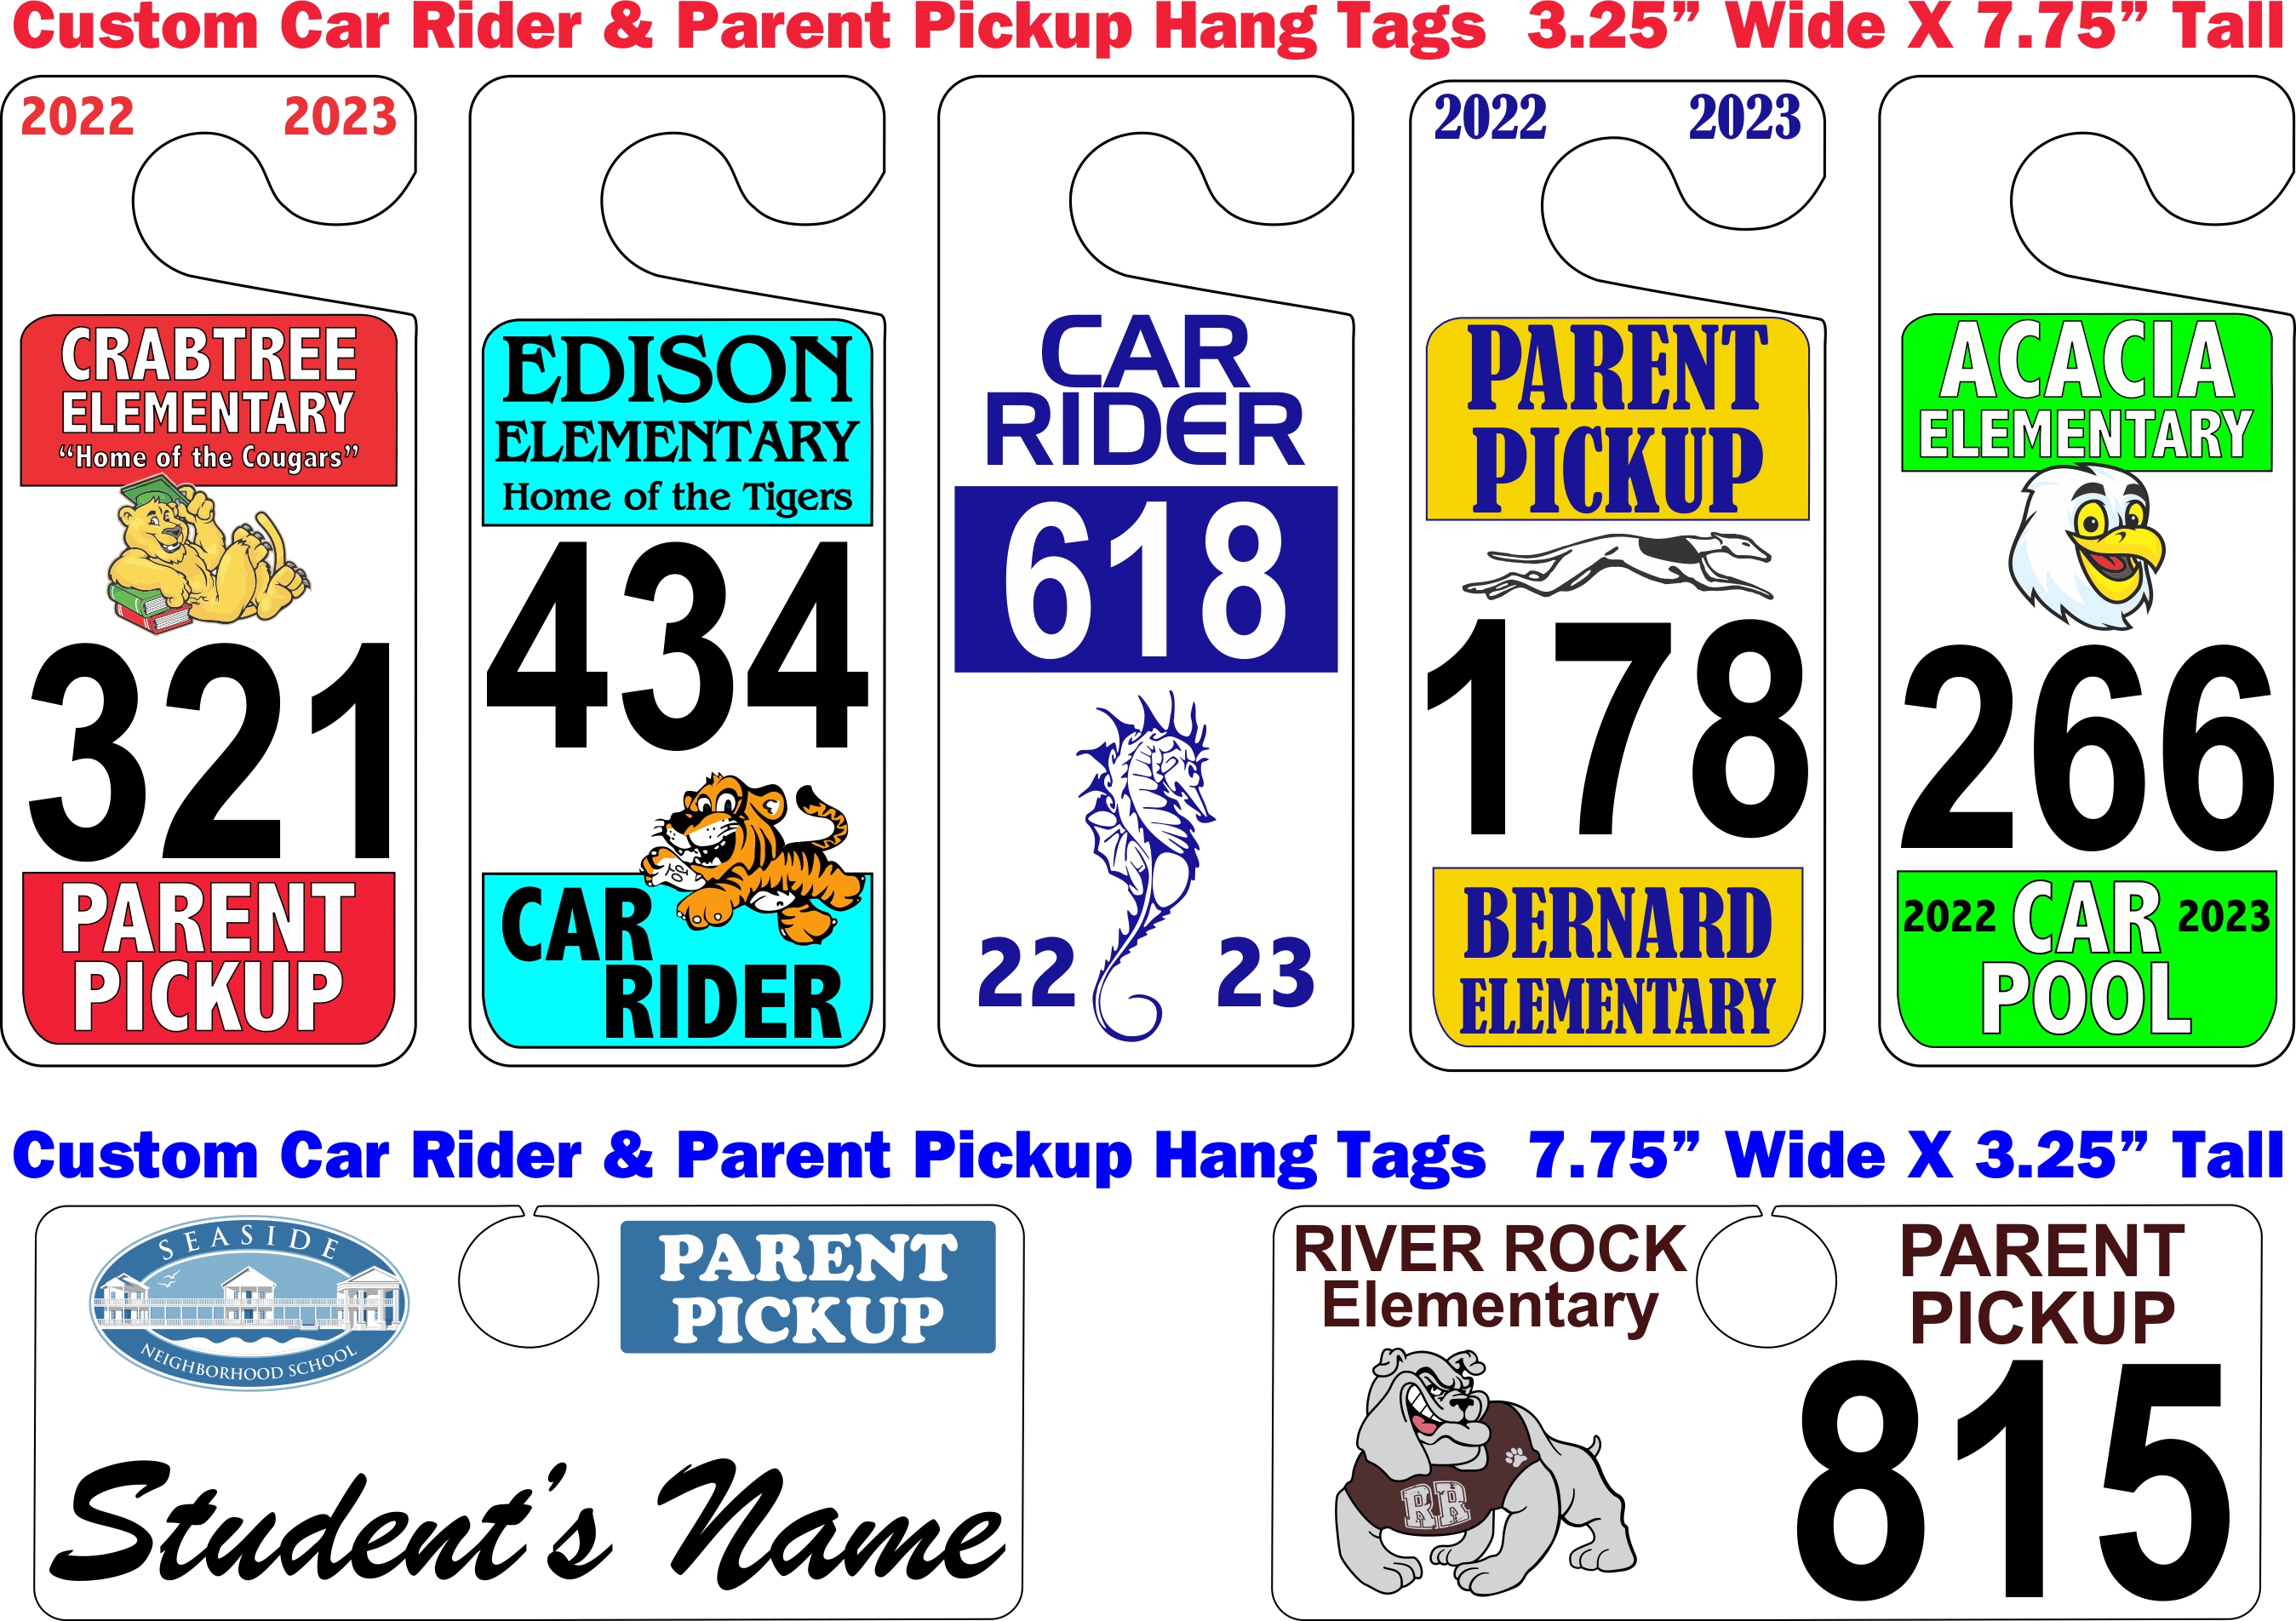 Car Rider Tags Template